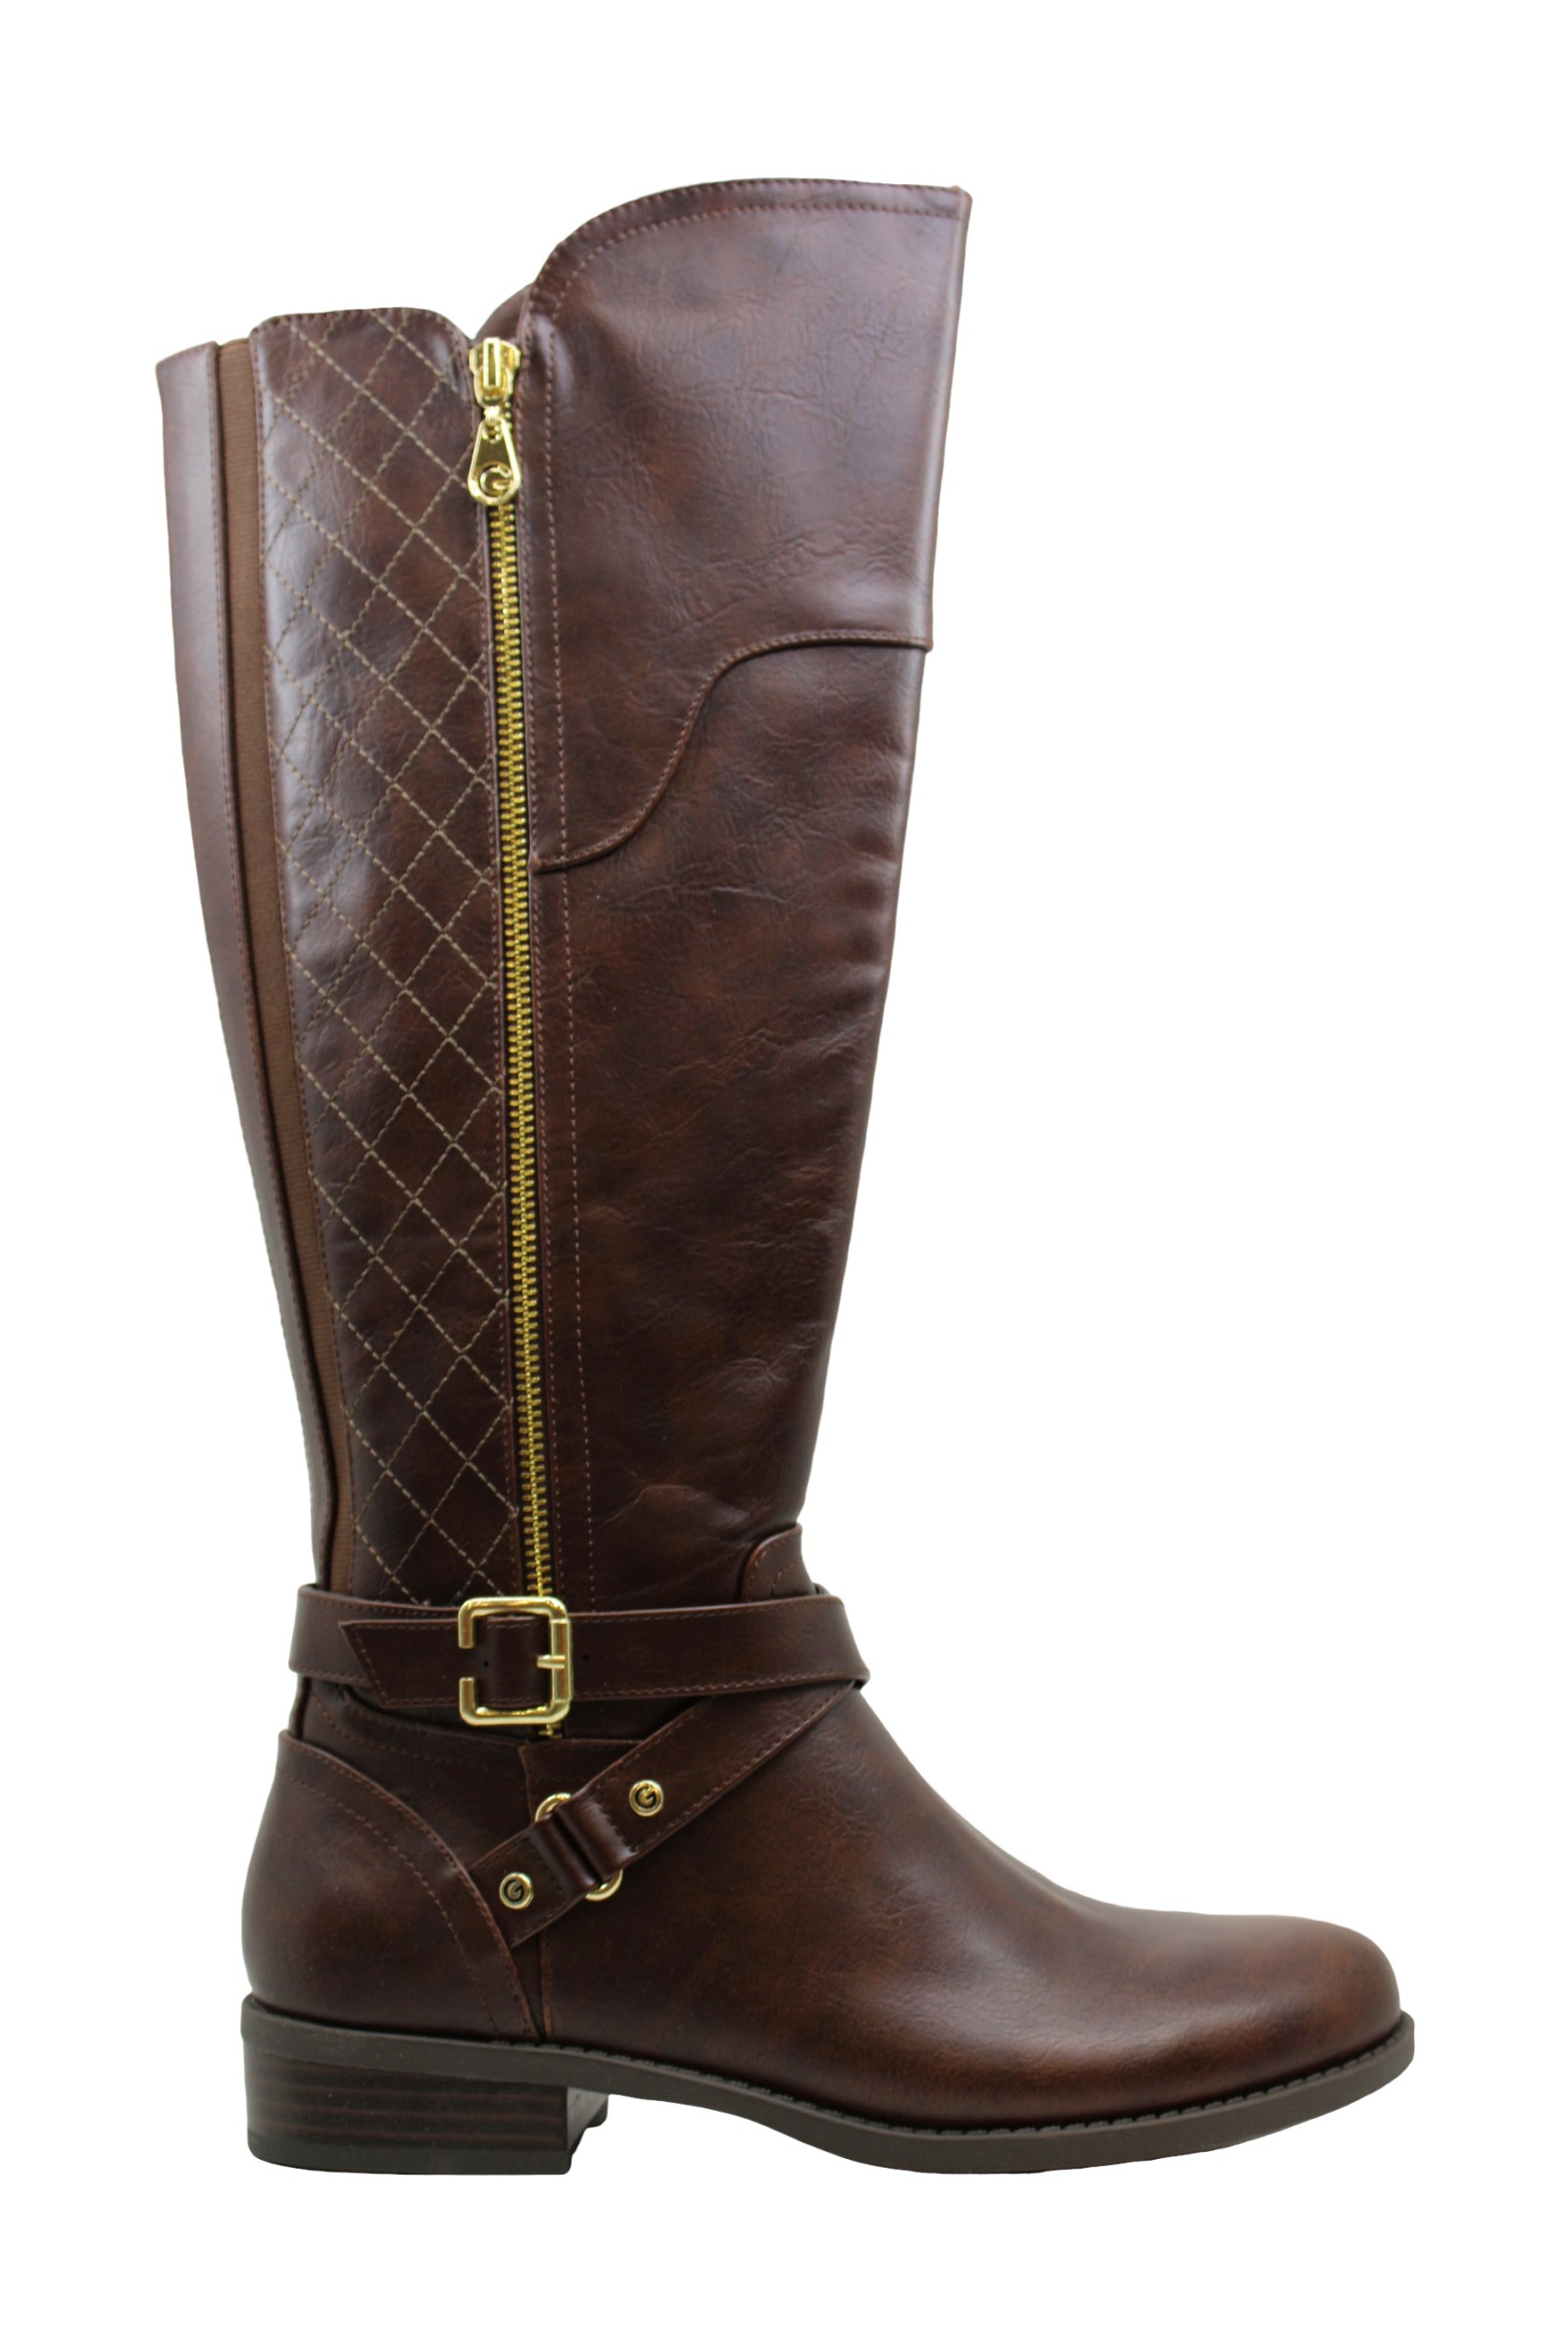 Wasserette Huisje Hick G by Guess Womens Haydin Brown Tall Riding BOOTS Shoes 5 Medium (b M) 7966  for sale online | eBay